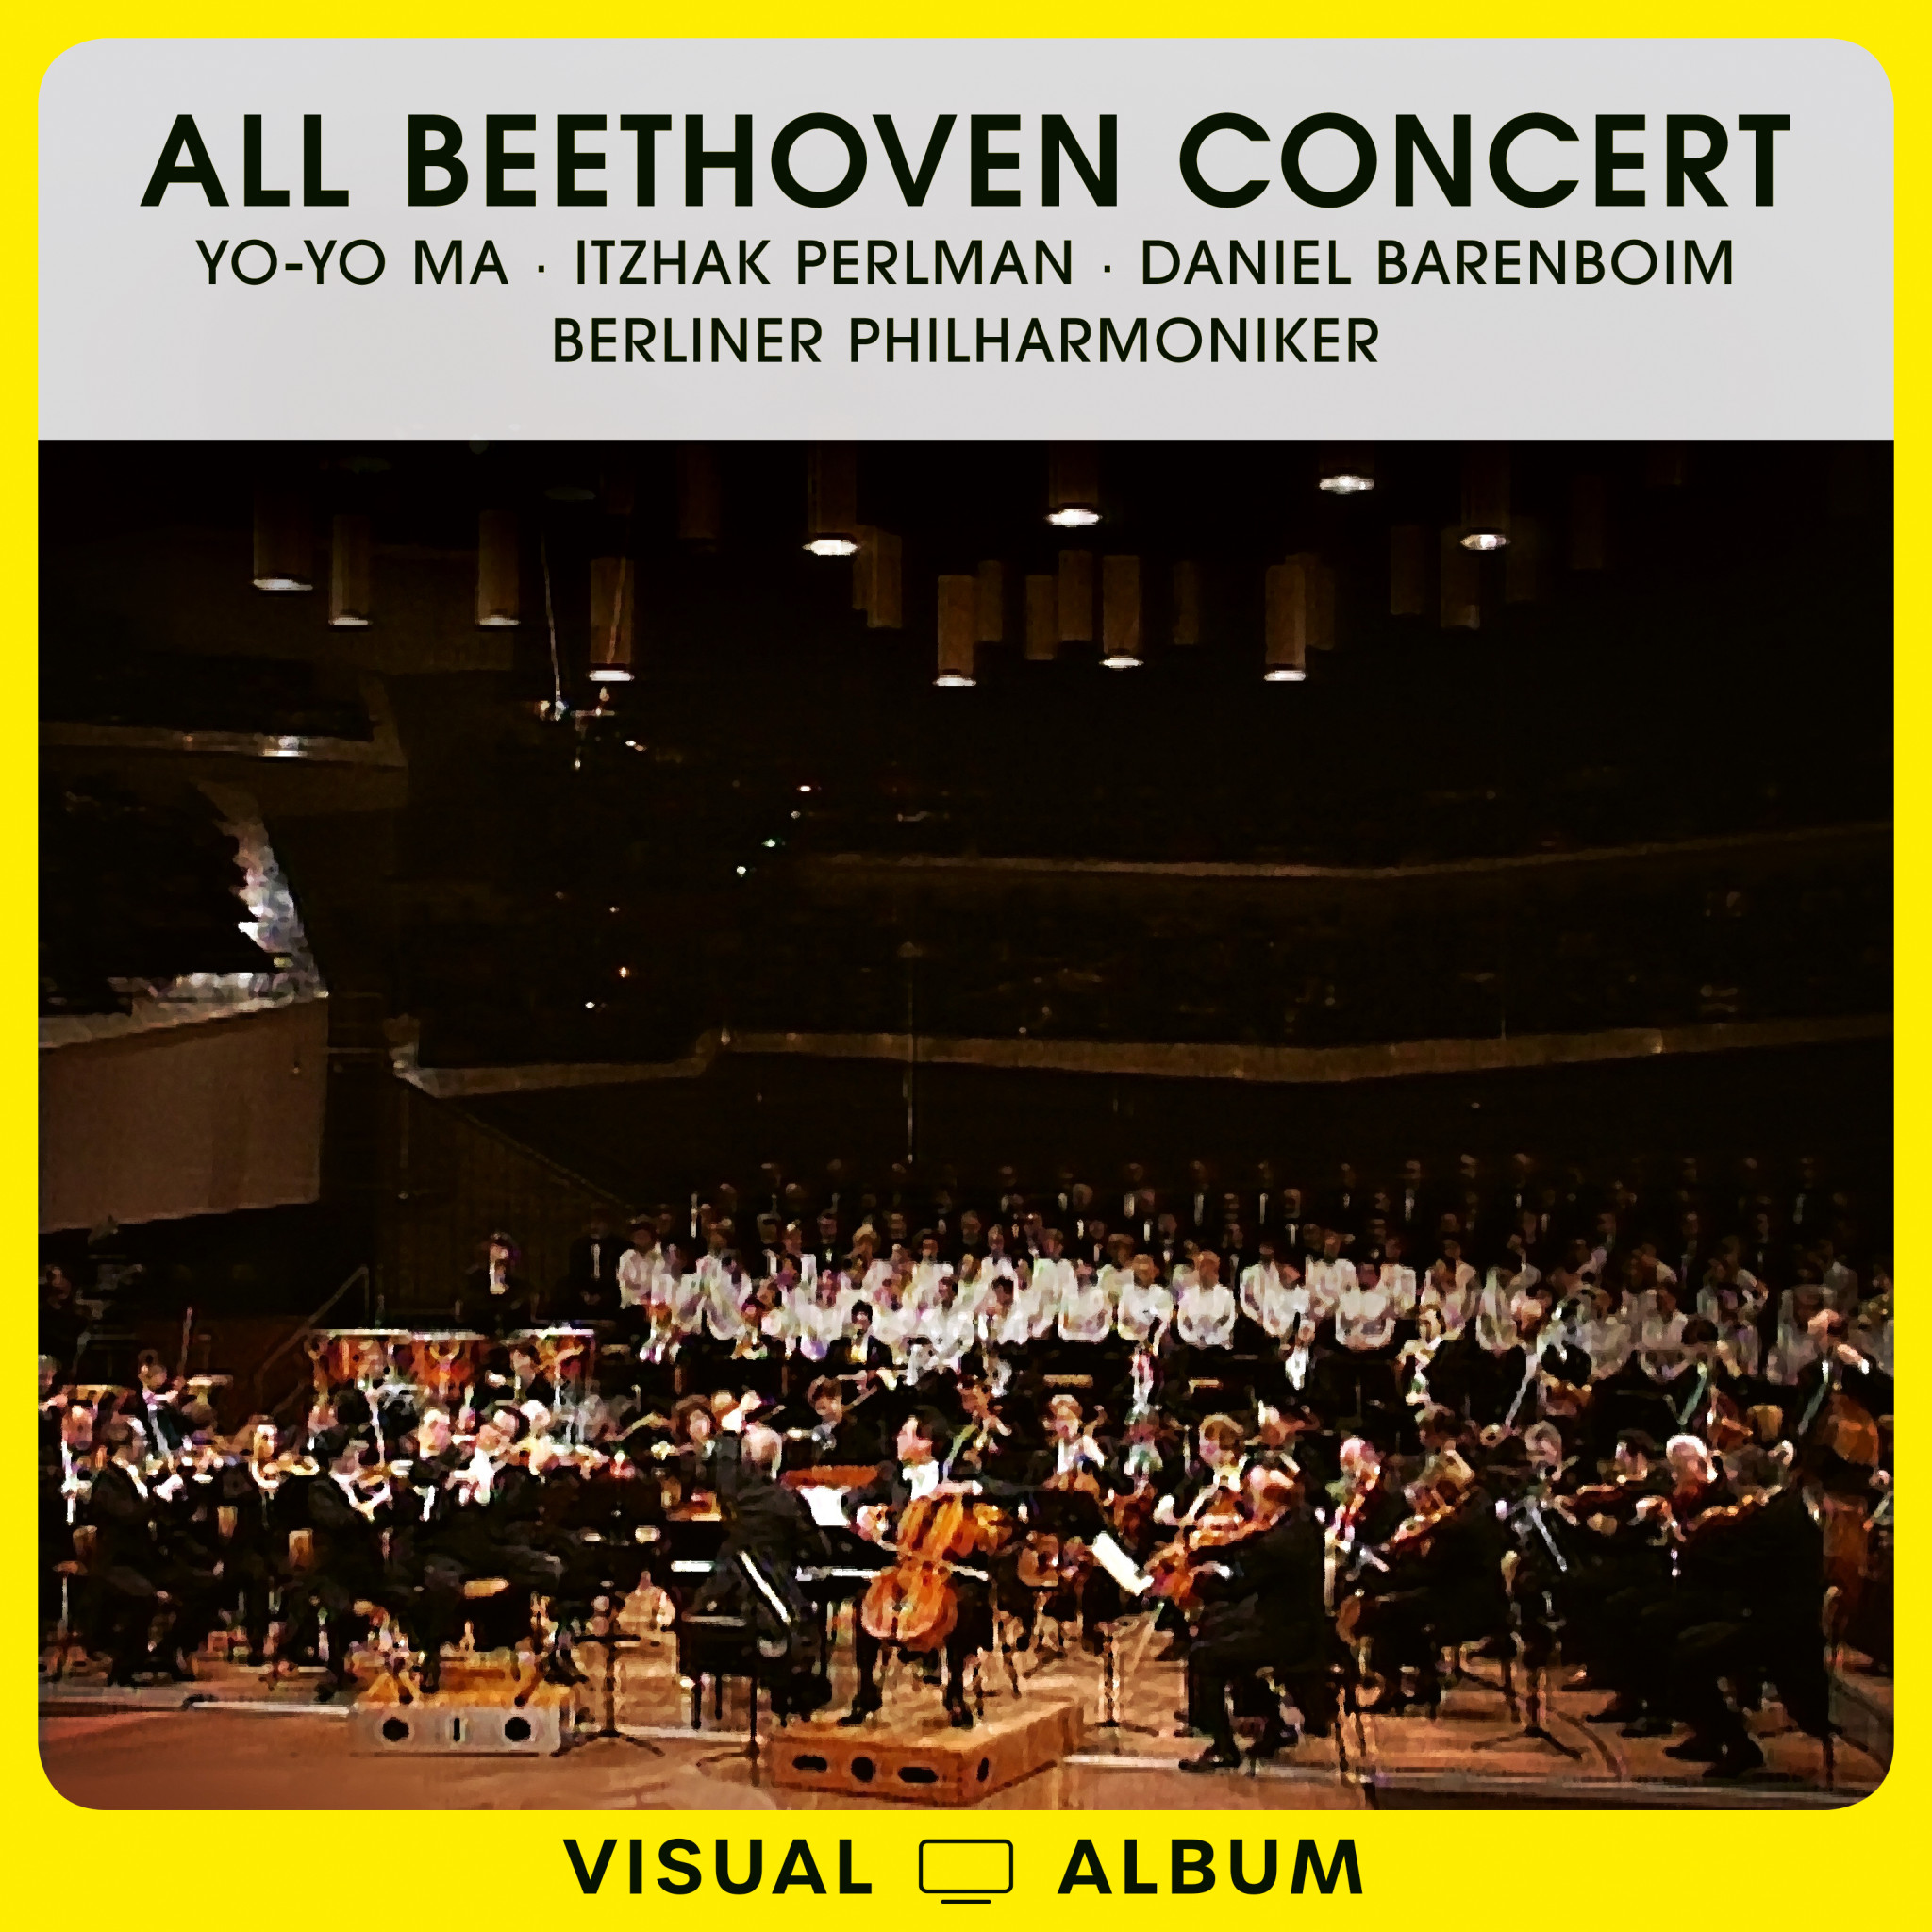 ALL BEETHOVEN CONCERT